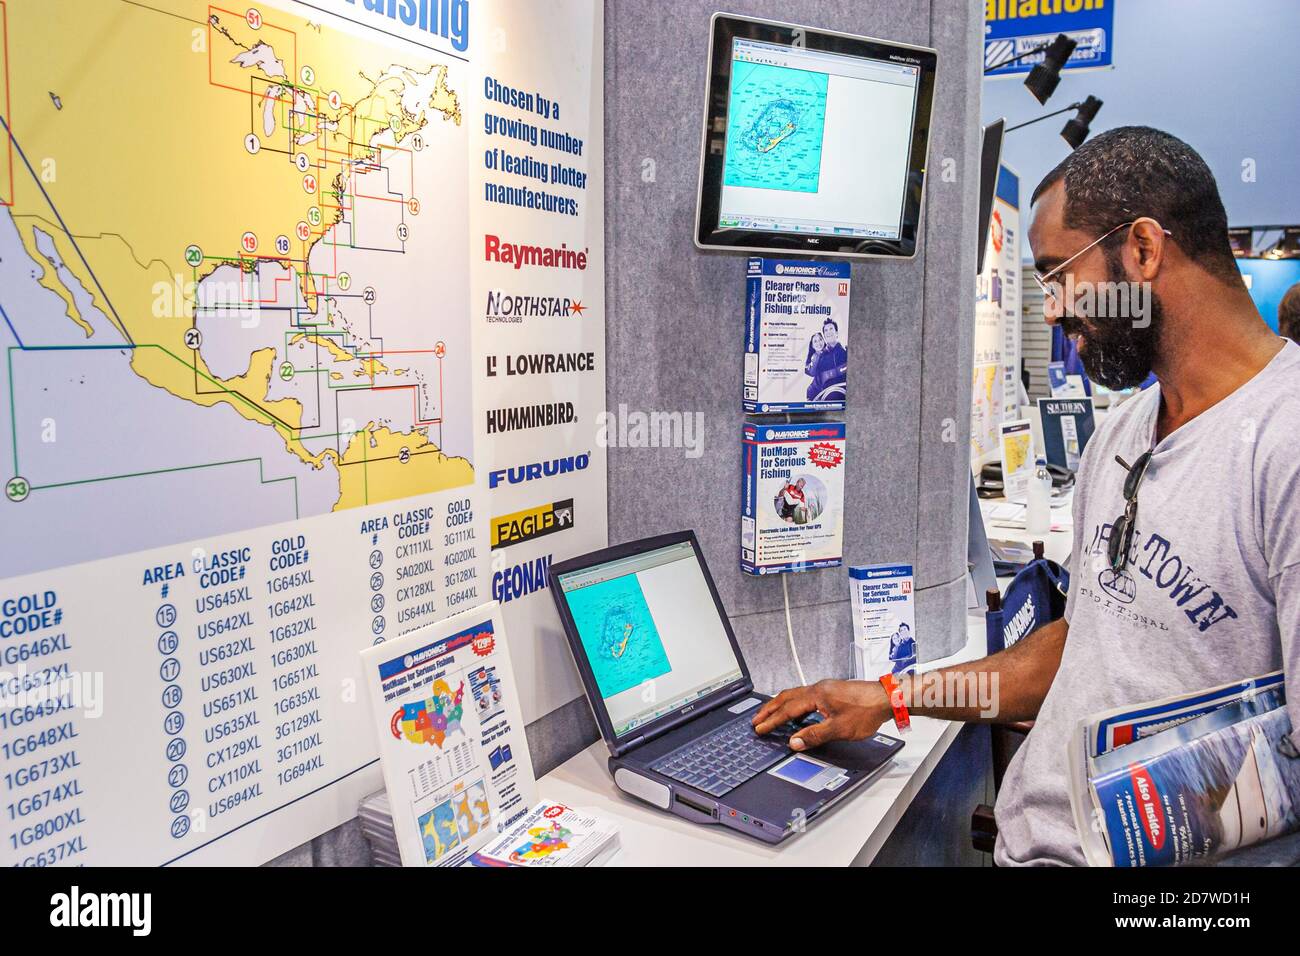 Florida,Miami Beach Convention Center,centre,International Boat Show multifunctional navigation products displays computer screens, Stock Photo